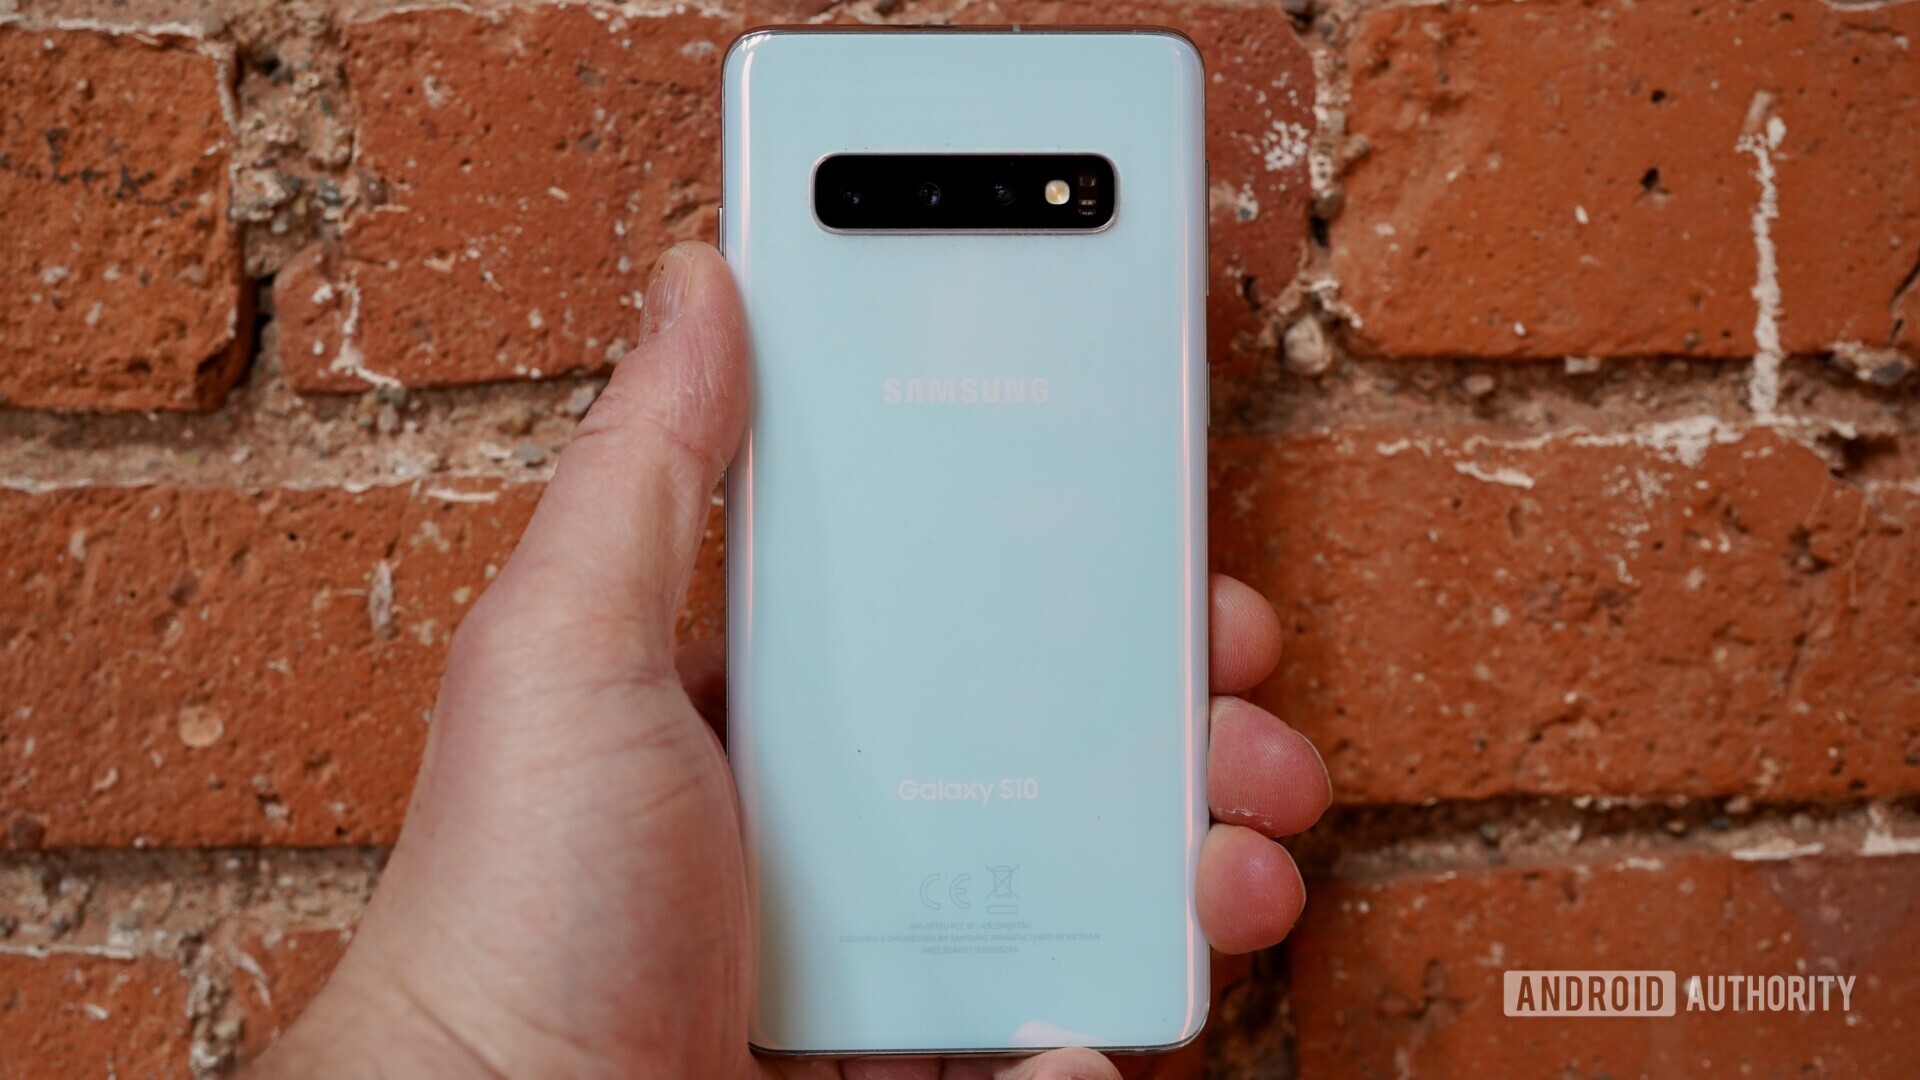 Backside of the Samsung galaxy S10 held in hand.